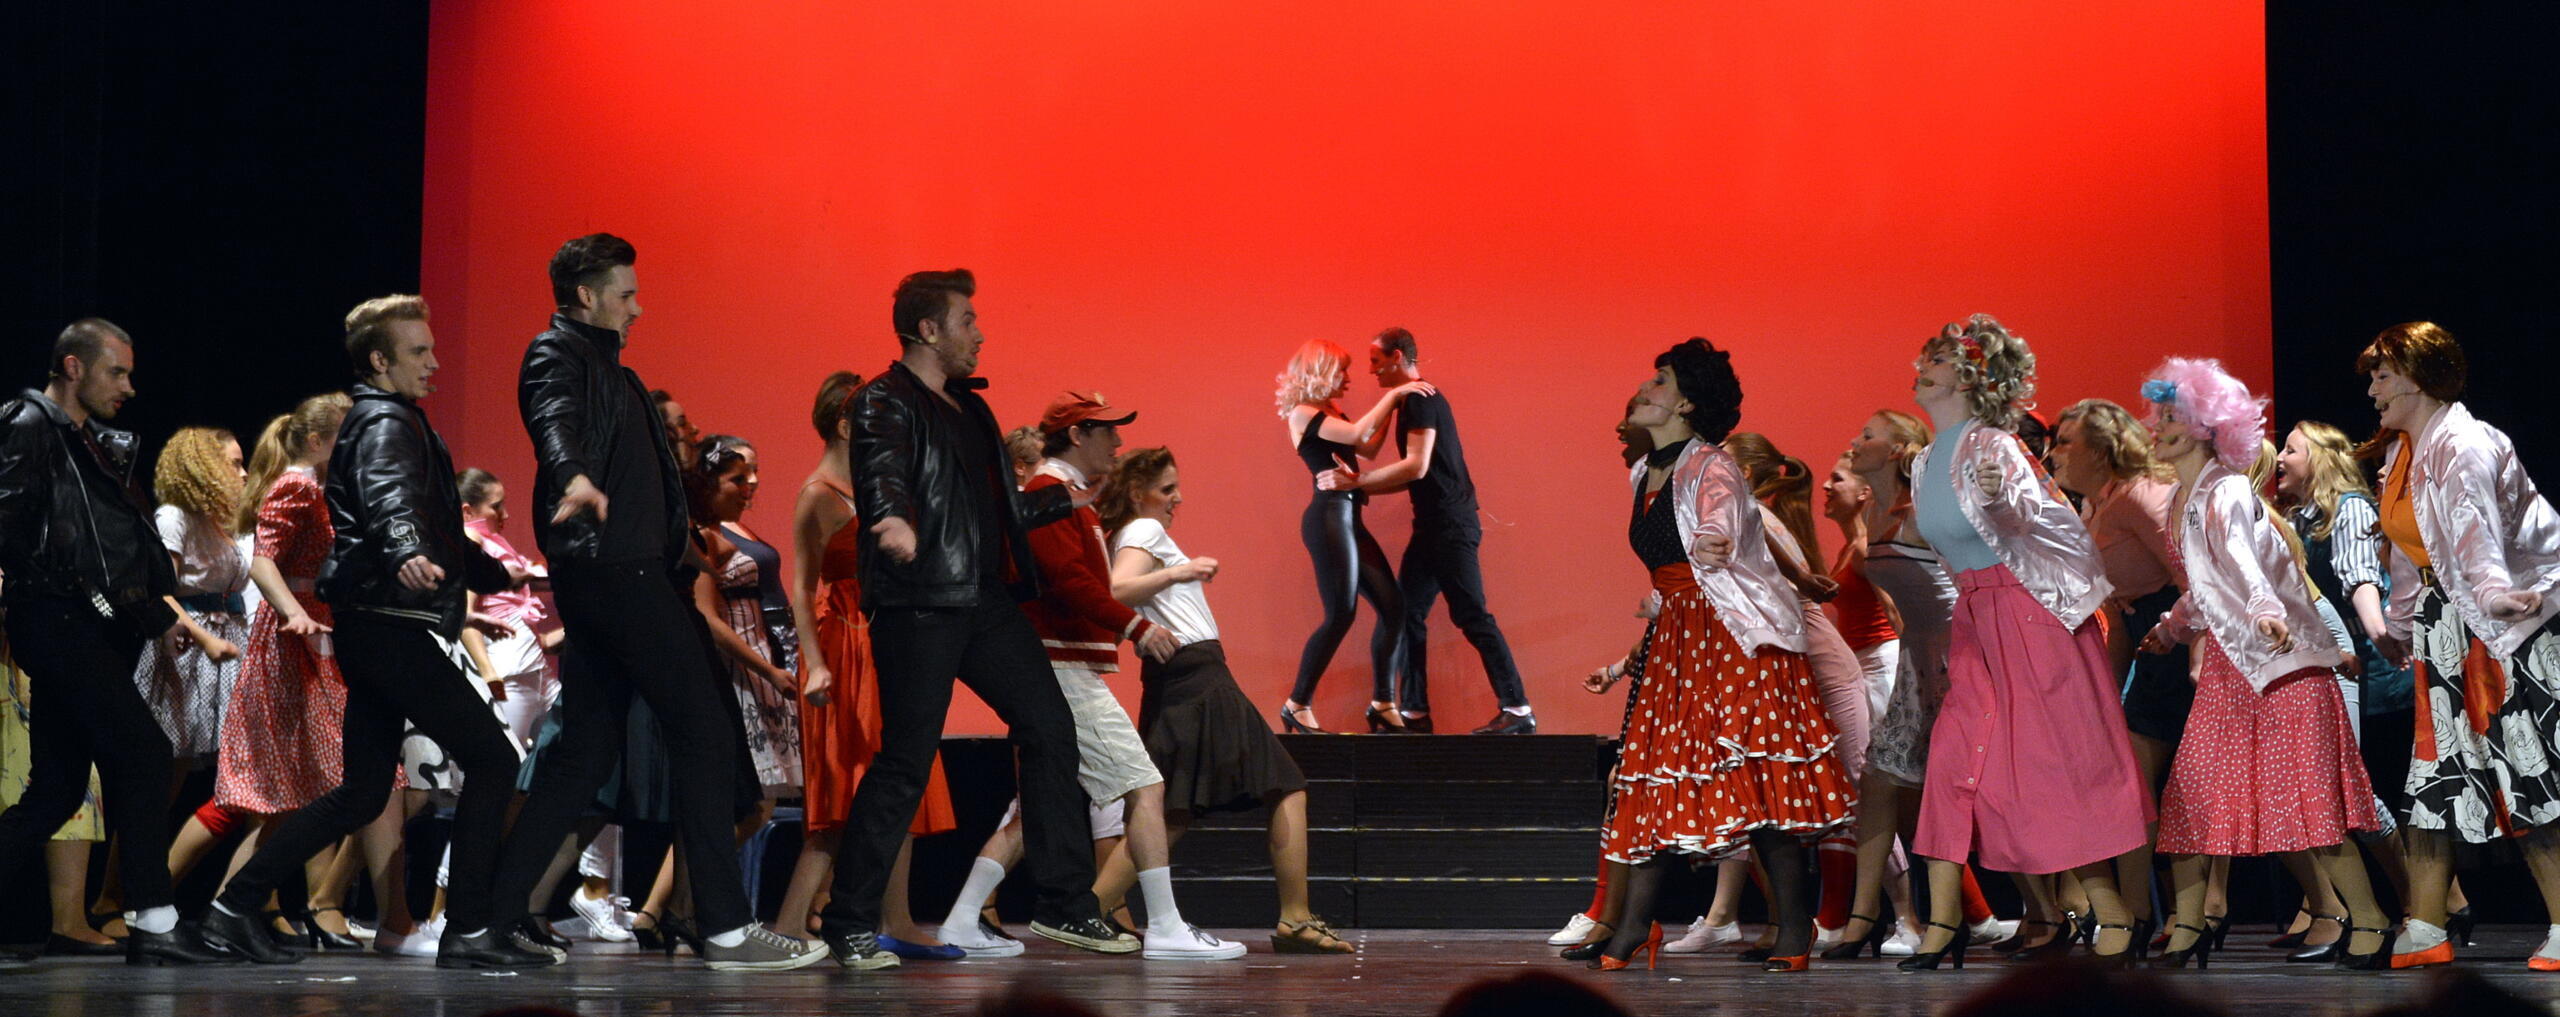 A stage with many dancers in 50s clothing.